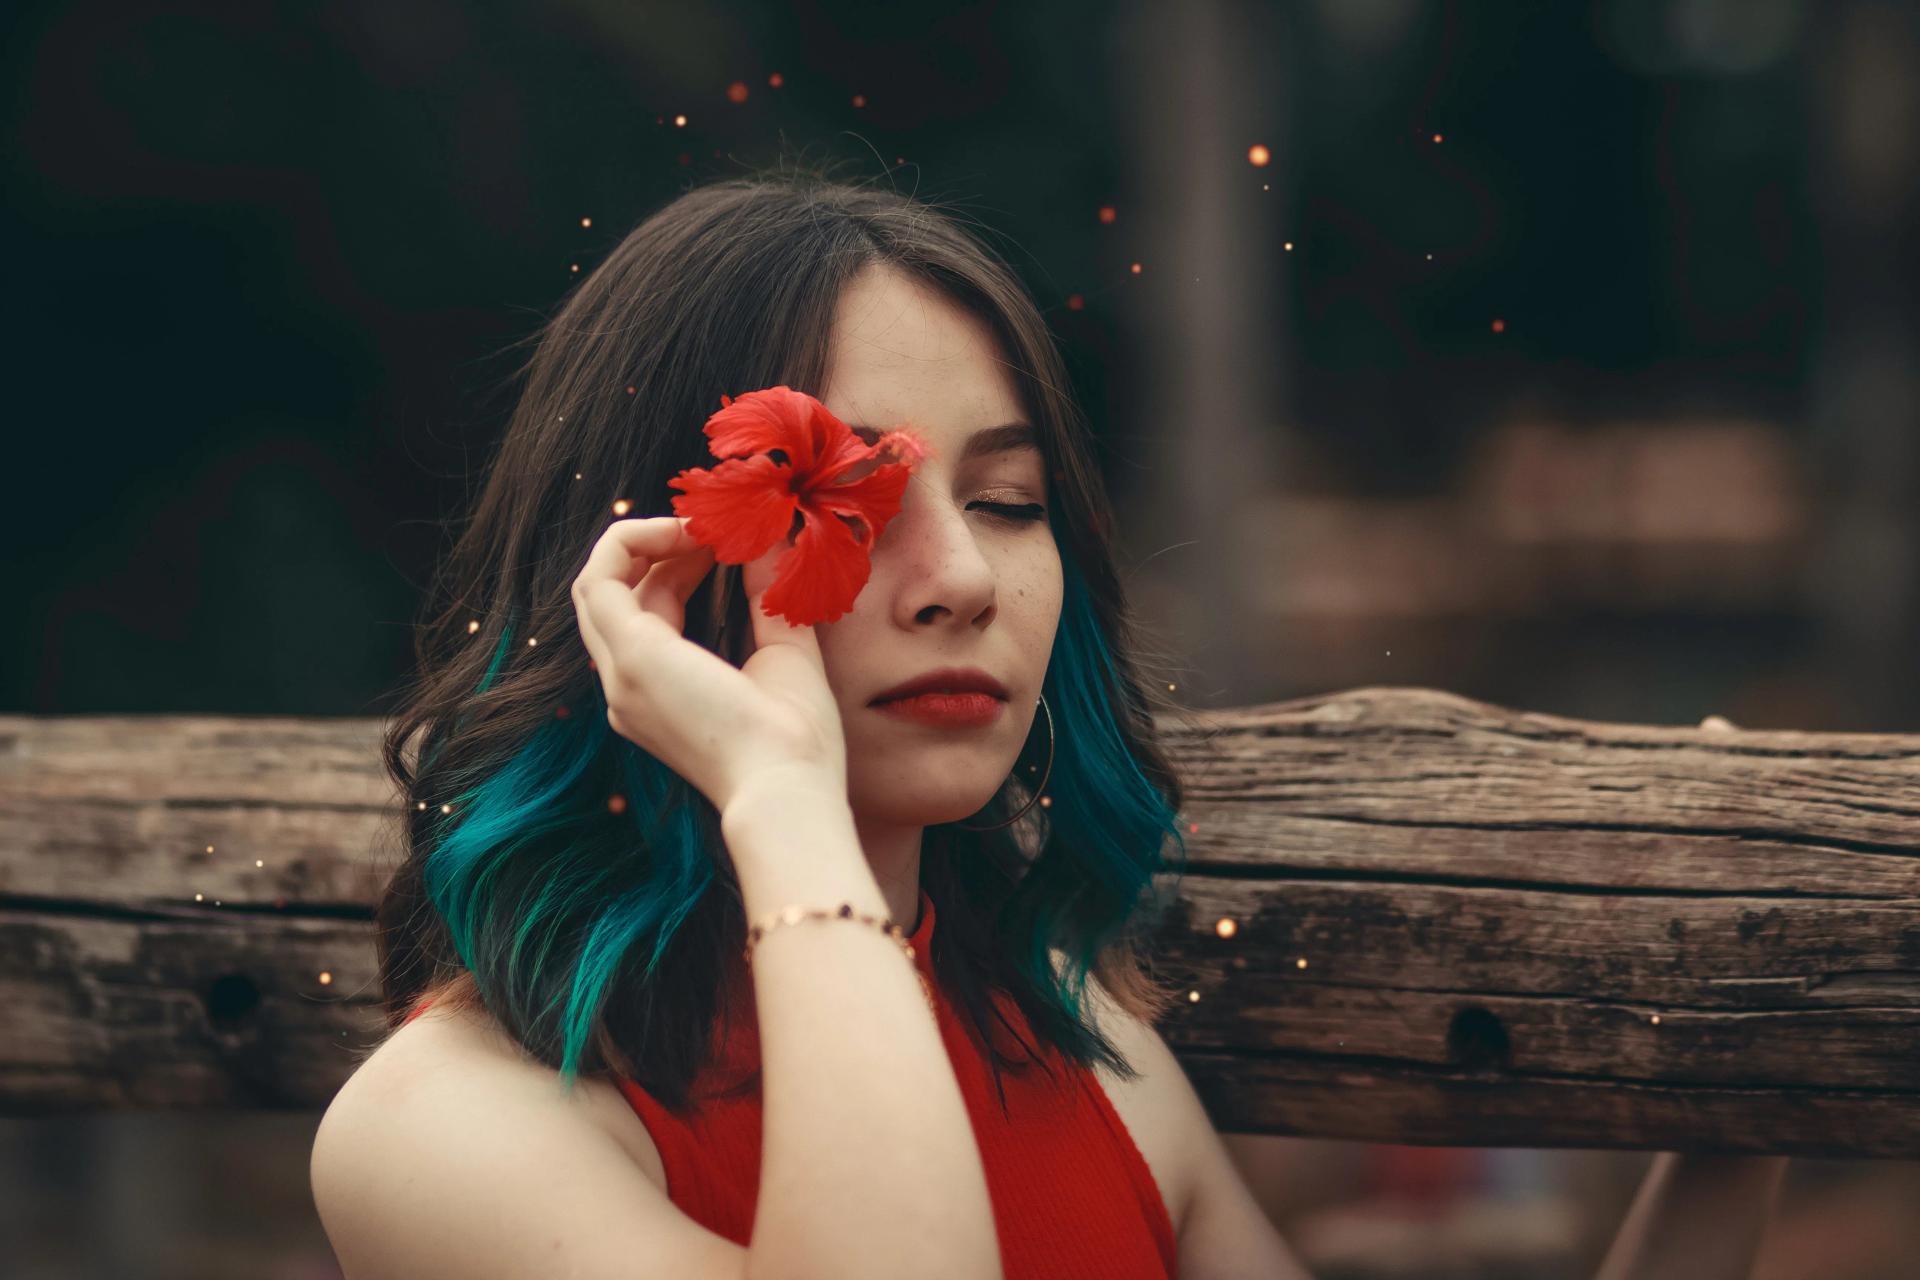 Red Flower and a Girl